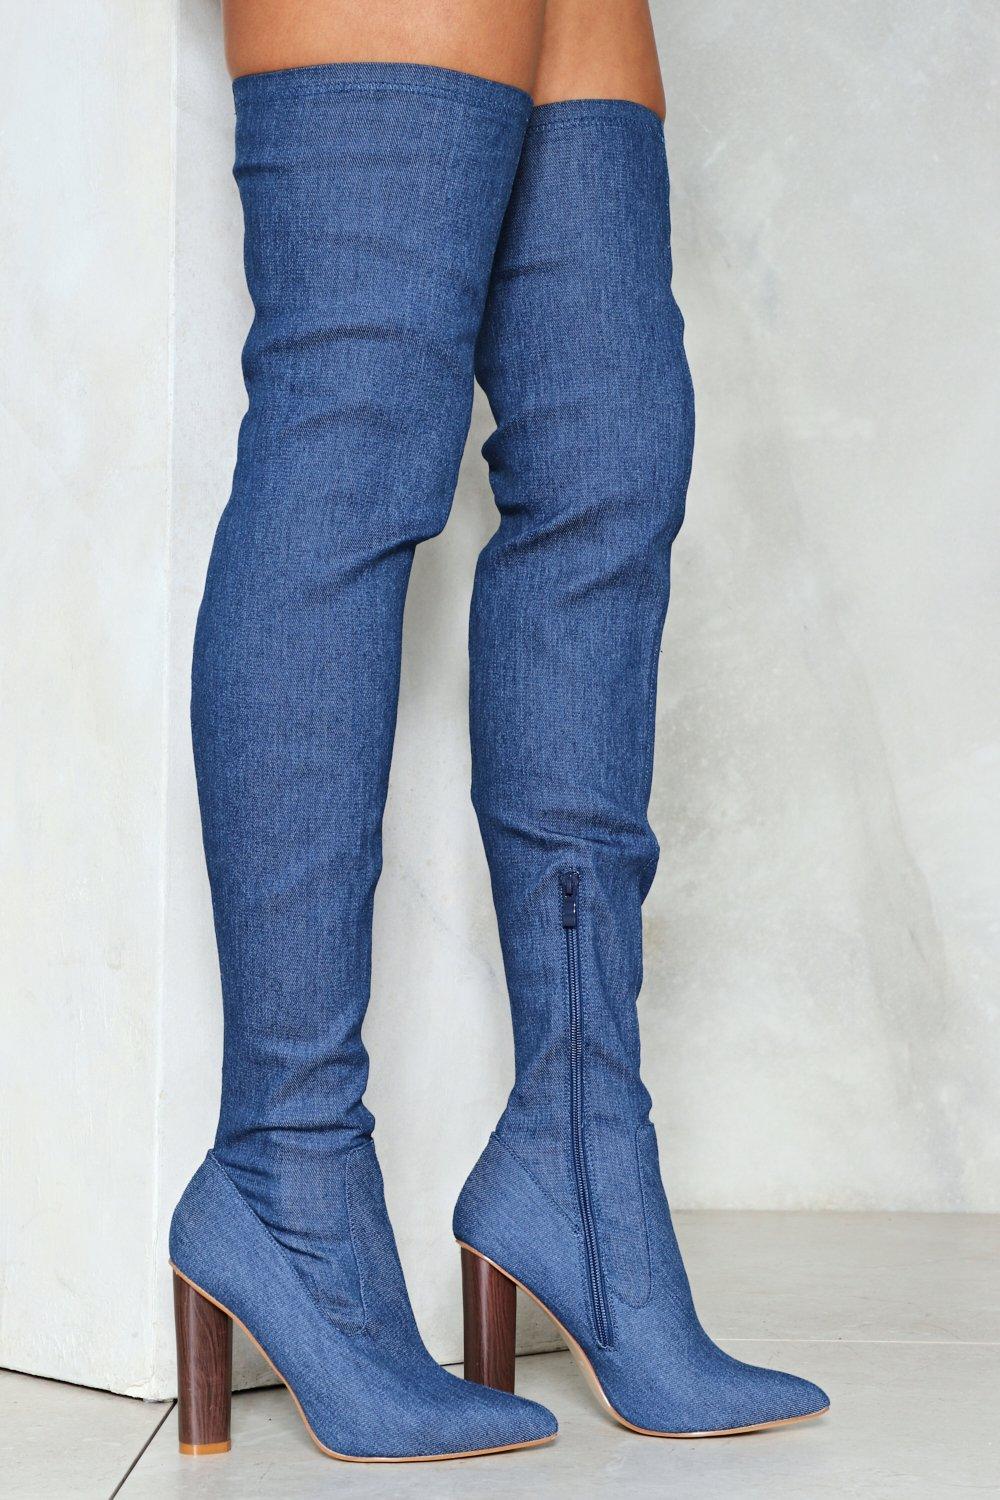 jeans knee high boots